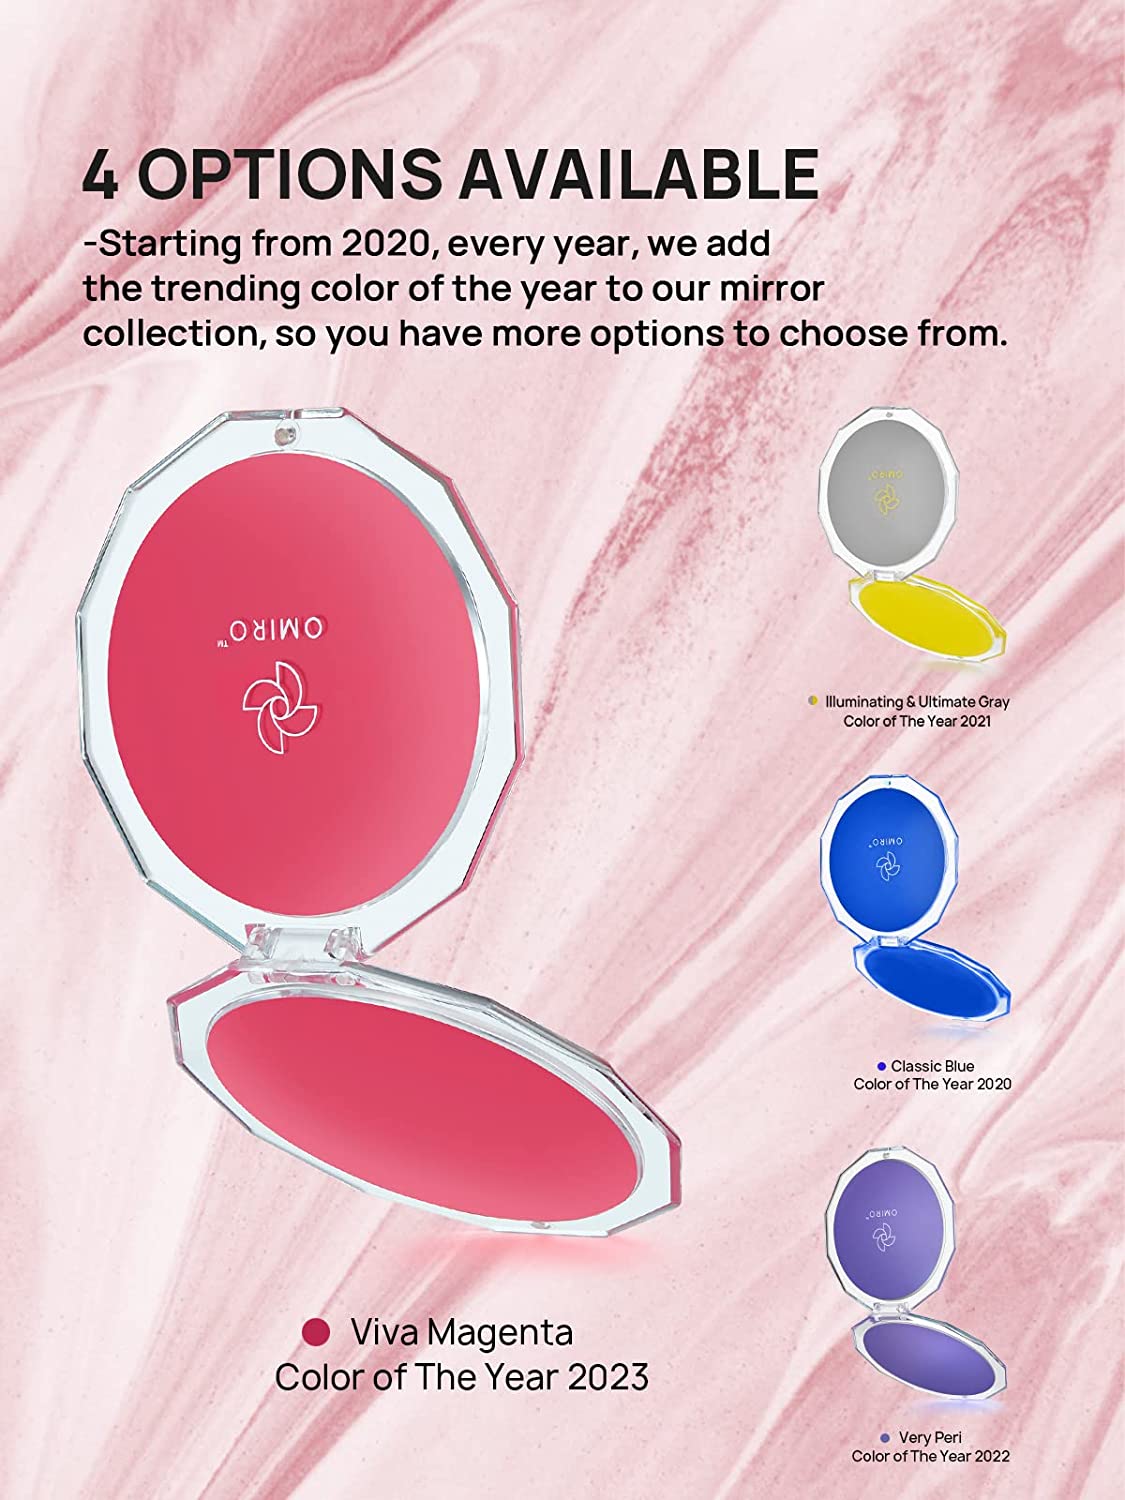 OMIRO Compact Mirror, 3½" 1X/10X Magnification Mini Folding Makeup Mirror for Purses (Color of The Year 2023 - Viva Magenta)